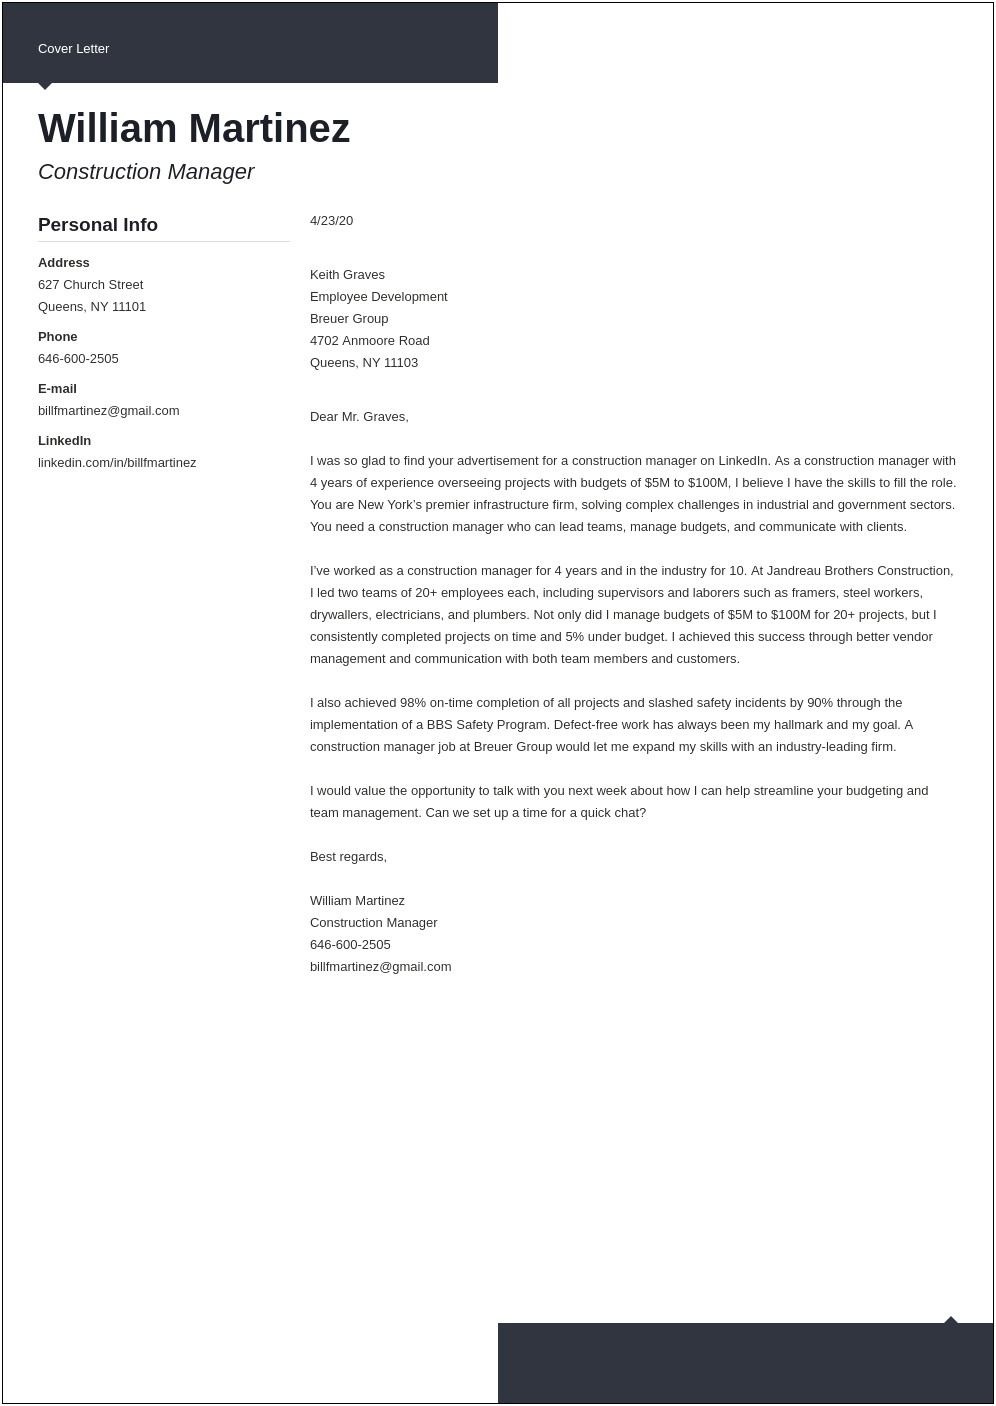 Construction Resume Cover Letter Free Samples